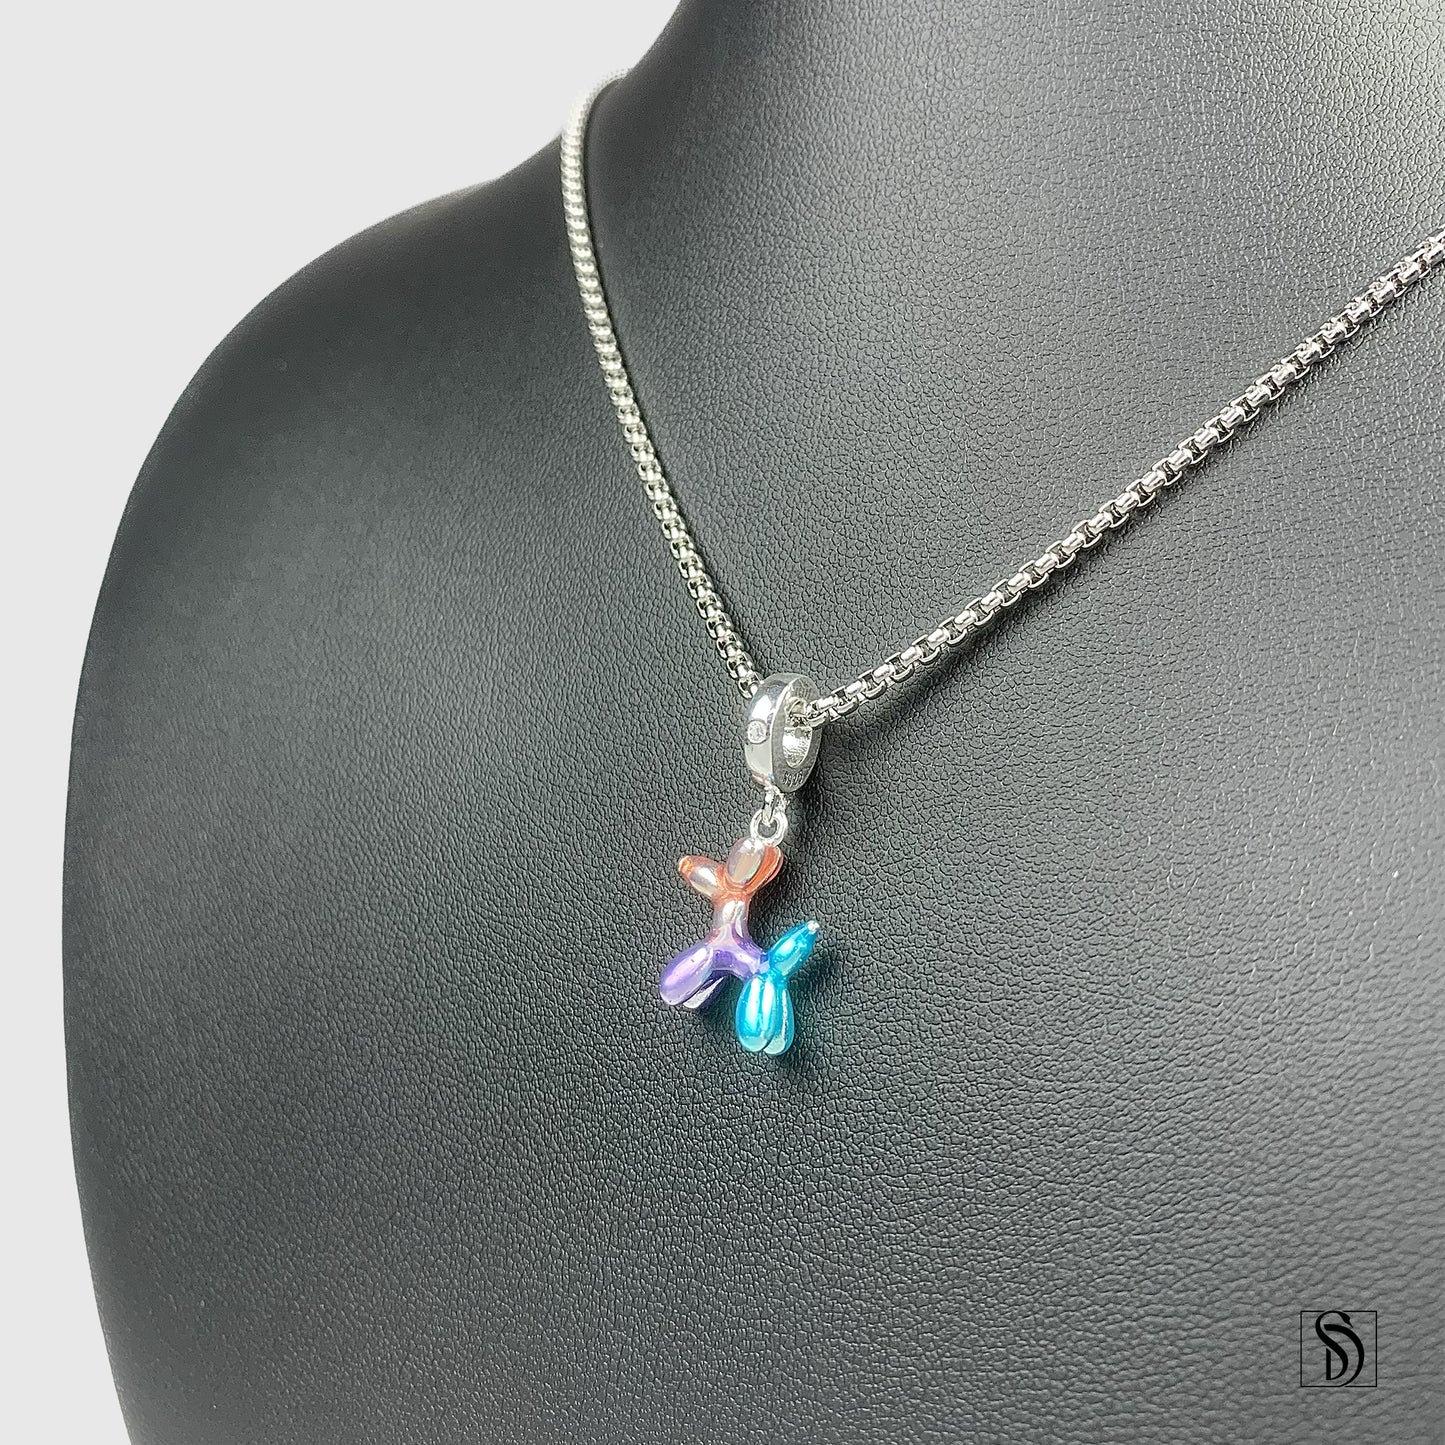 Colorful Balloon Dog Pendant Necklace